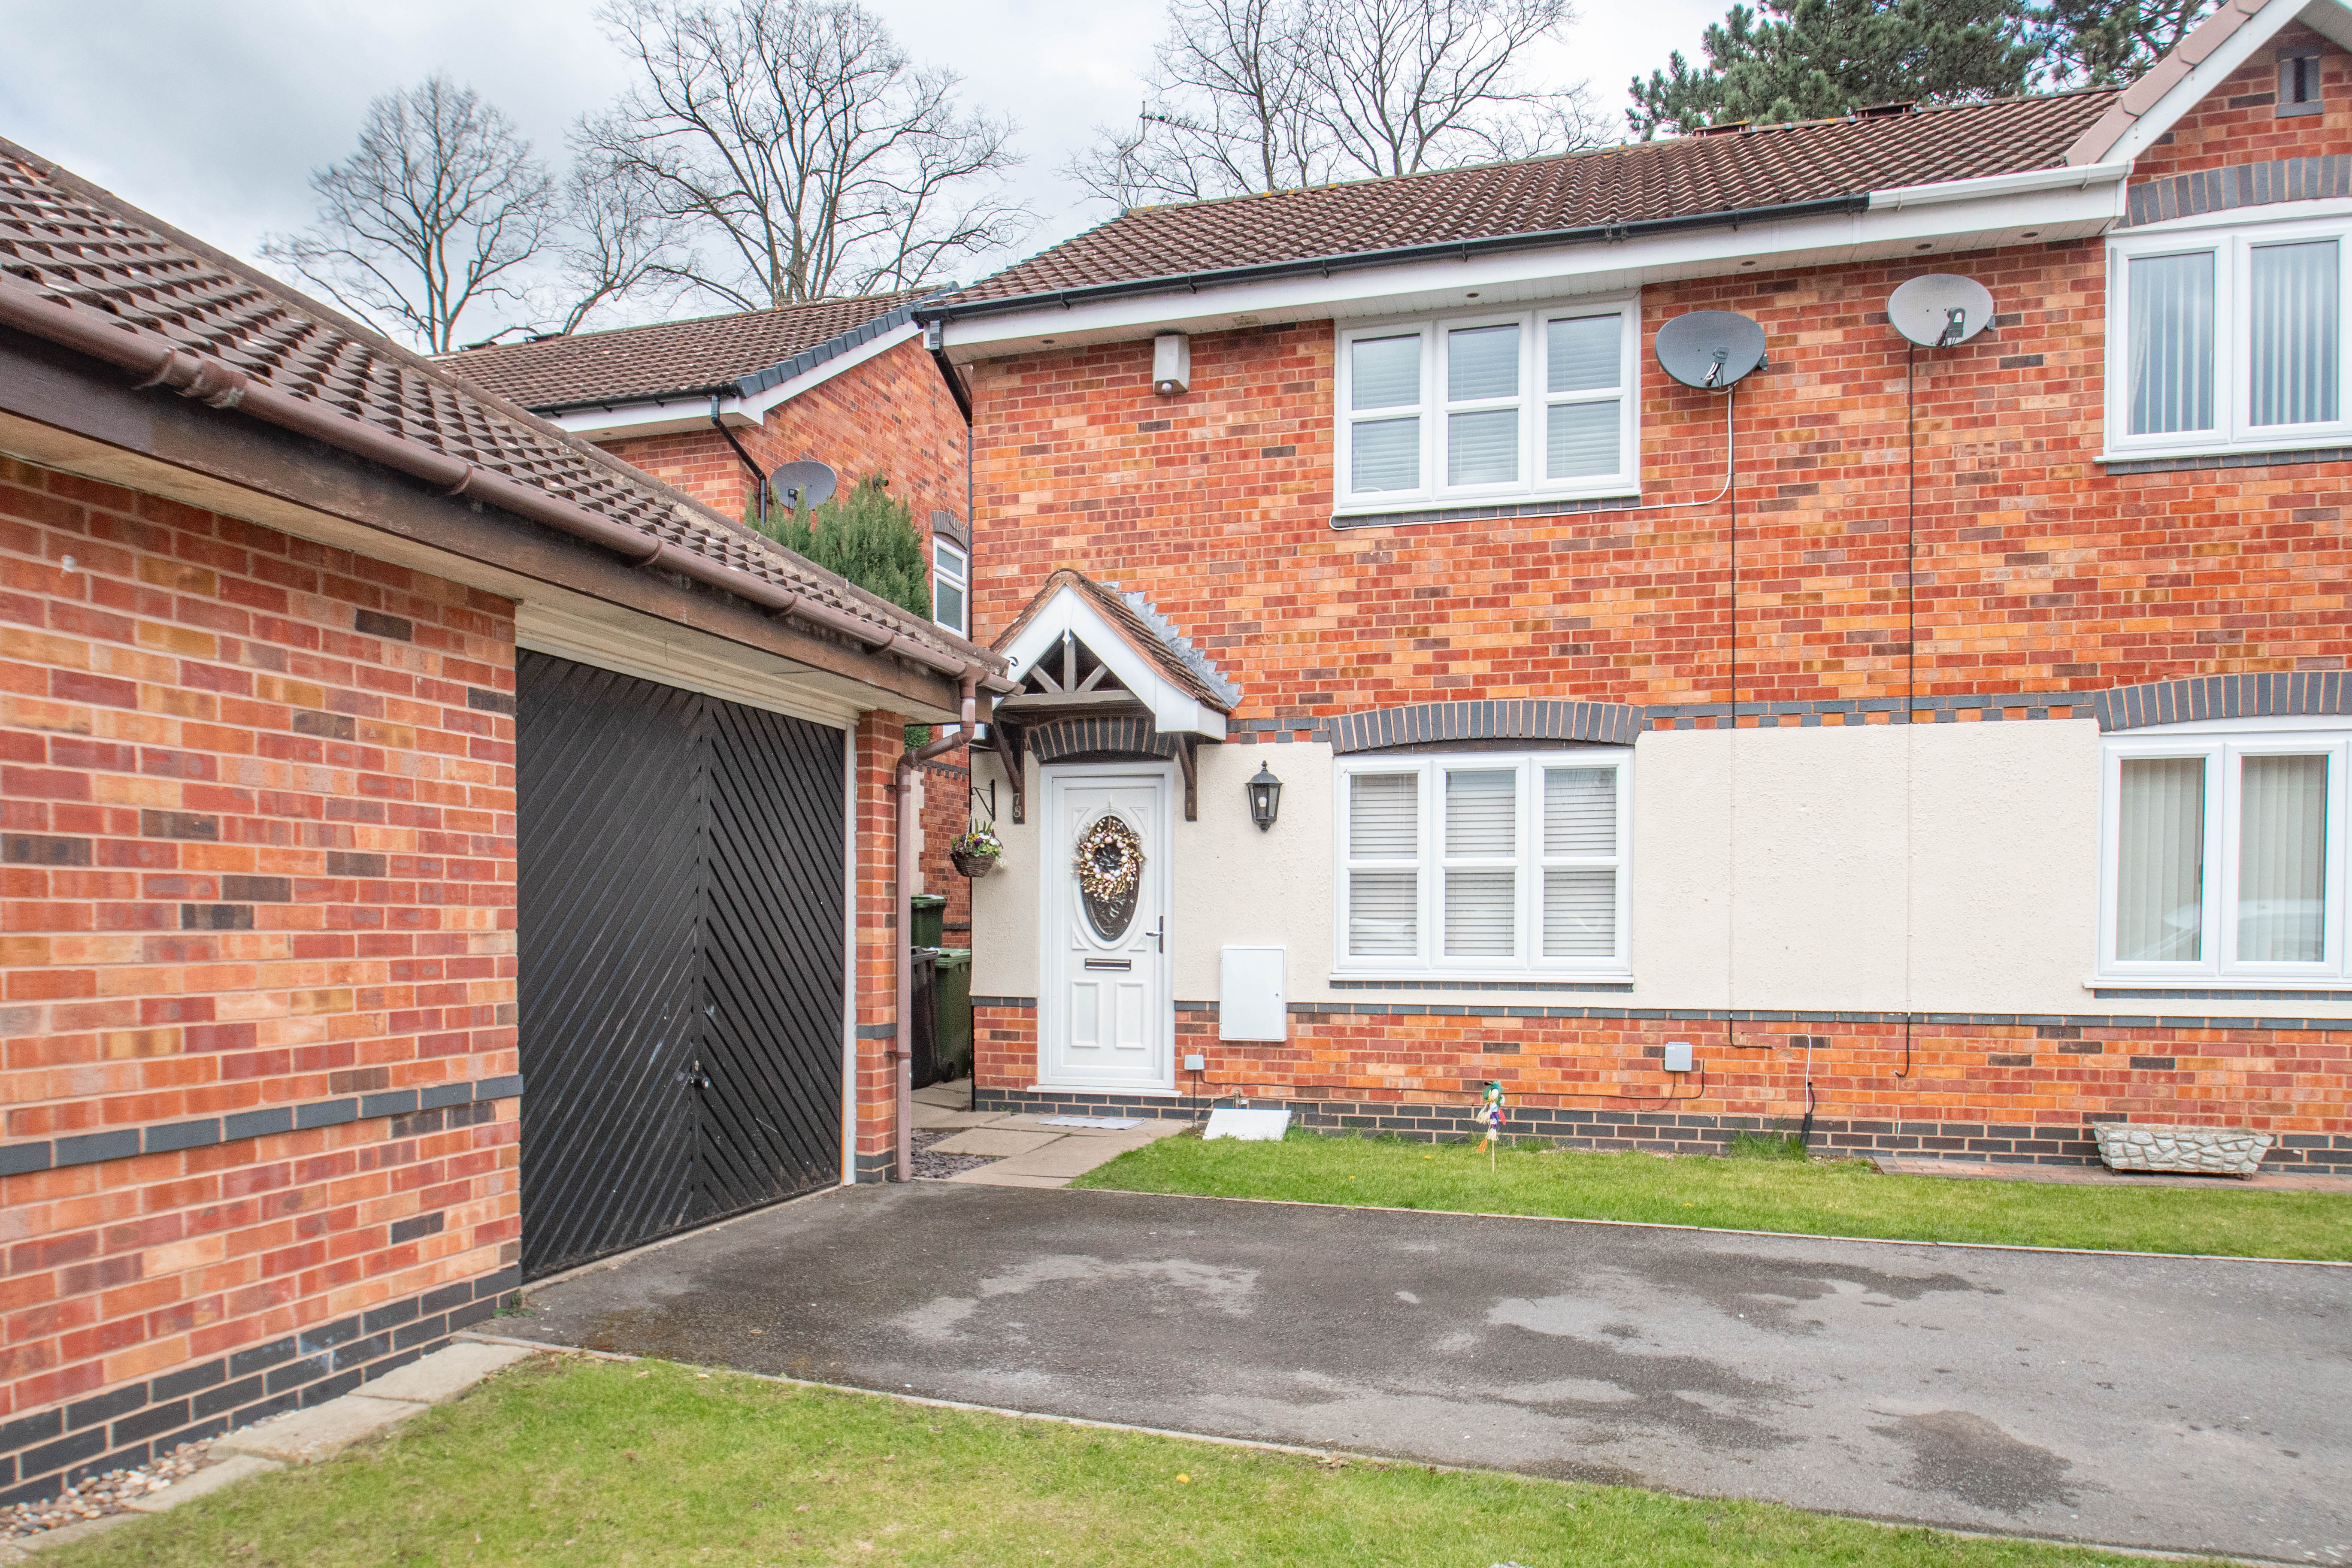 3 bed house for sale in Terrys Close, Redditch - Property Image 1